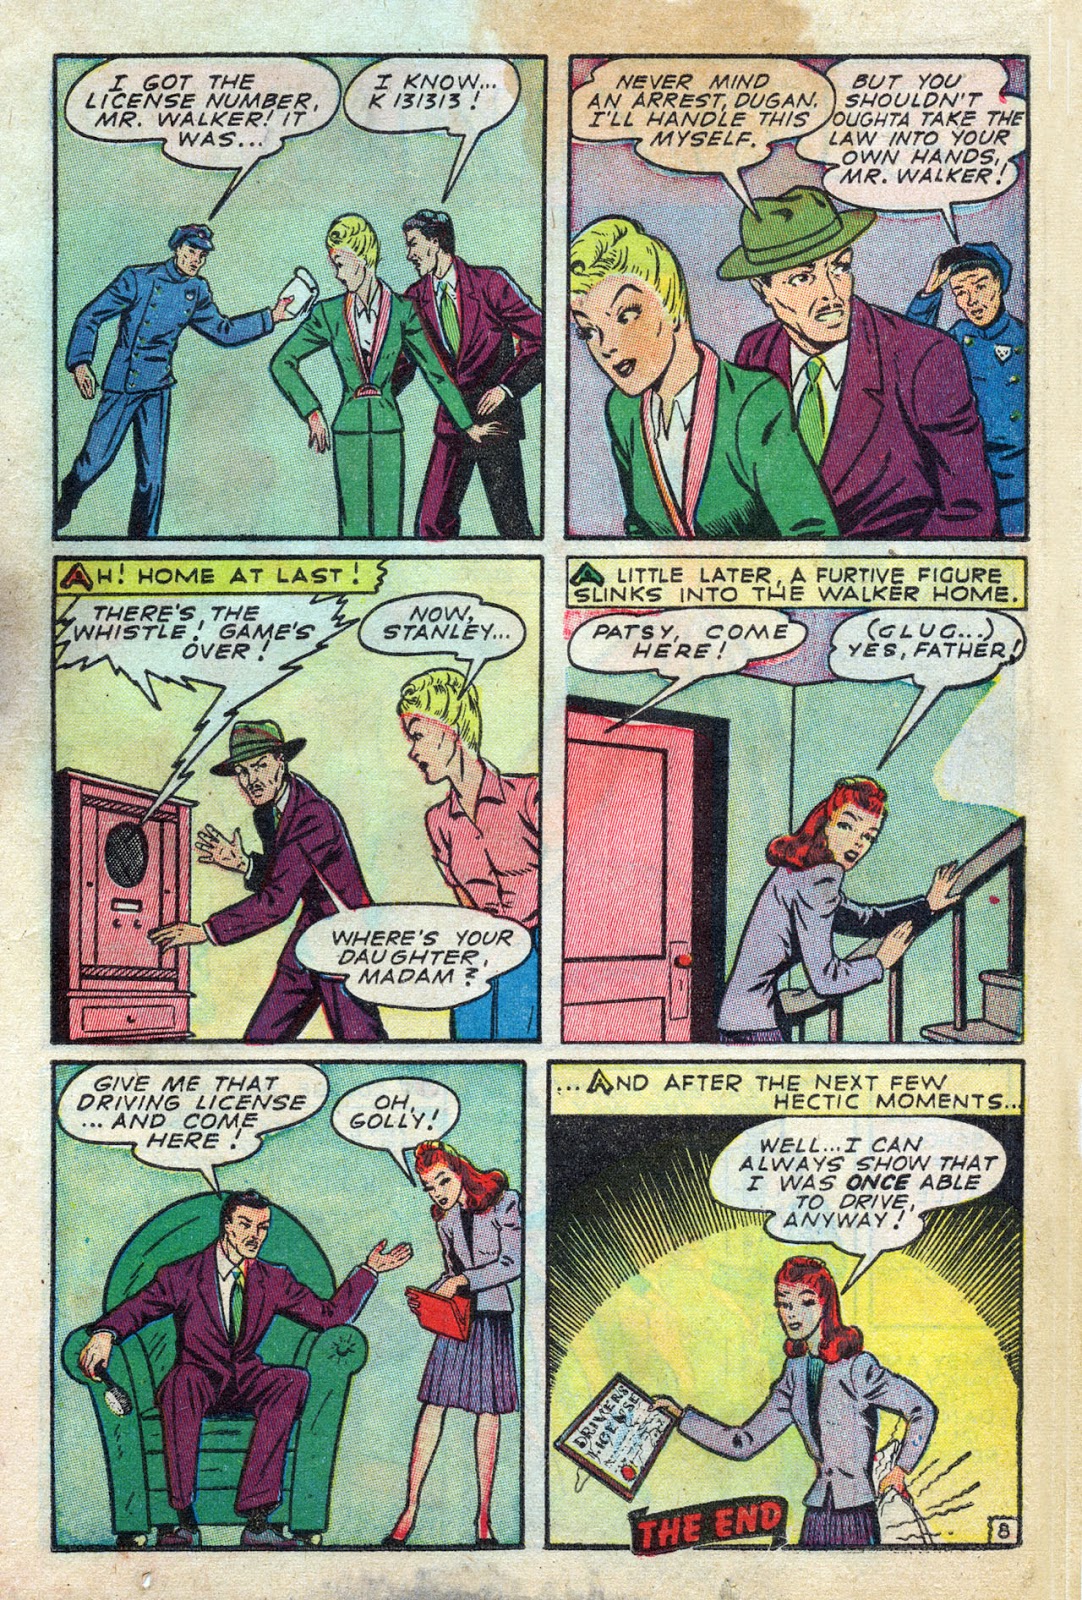 patsy walker #7 post-spanking page